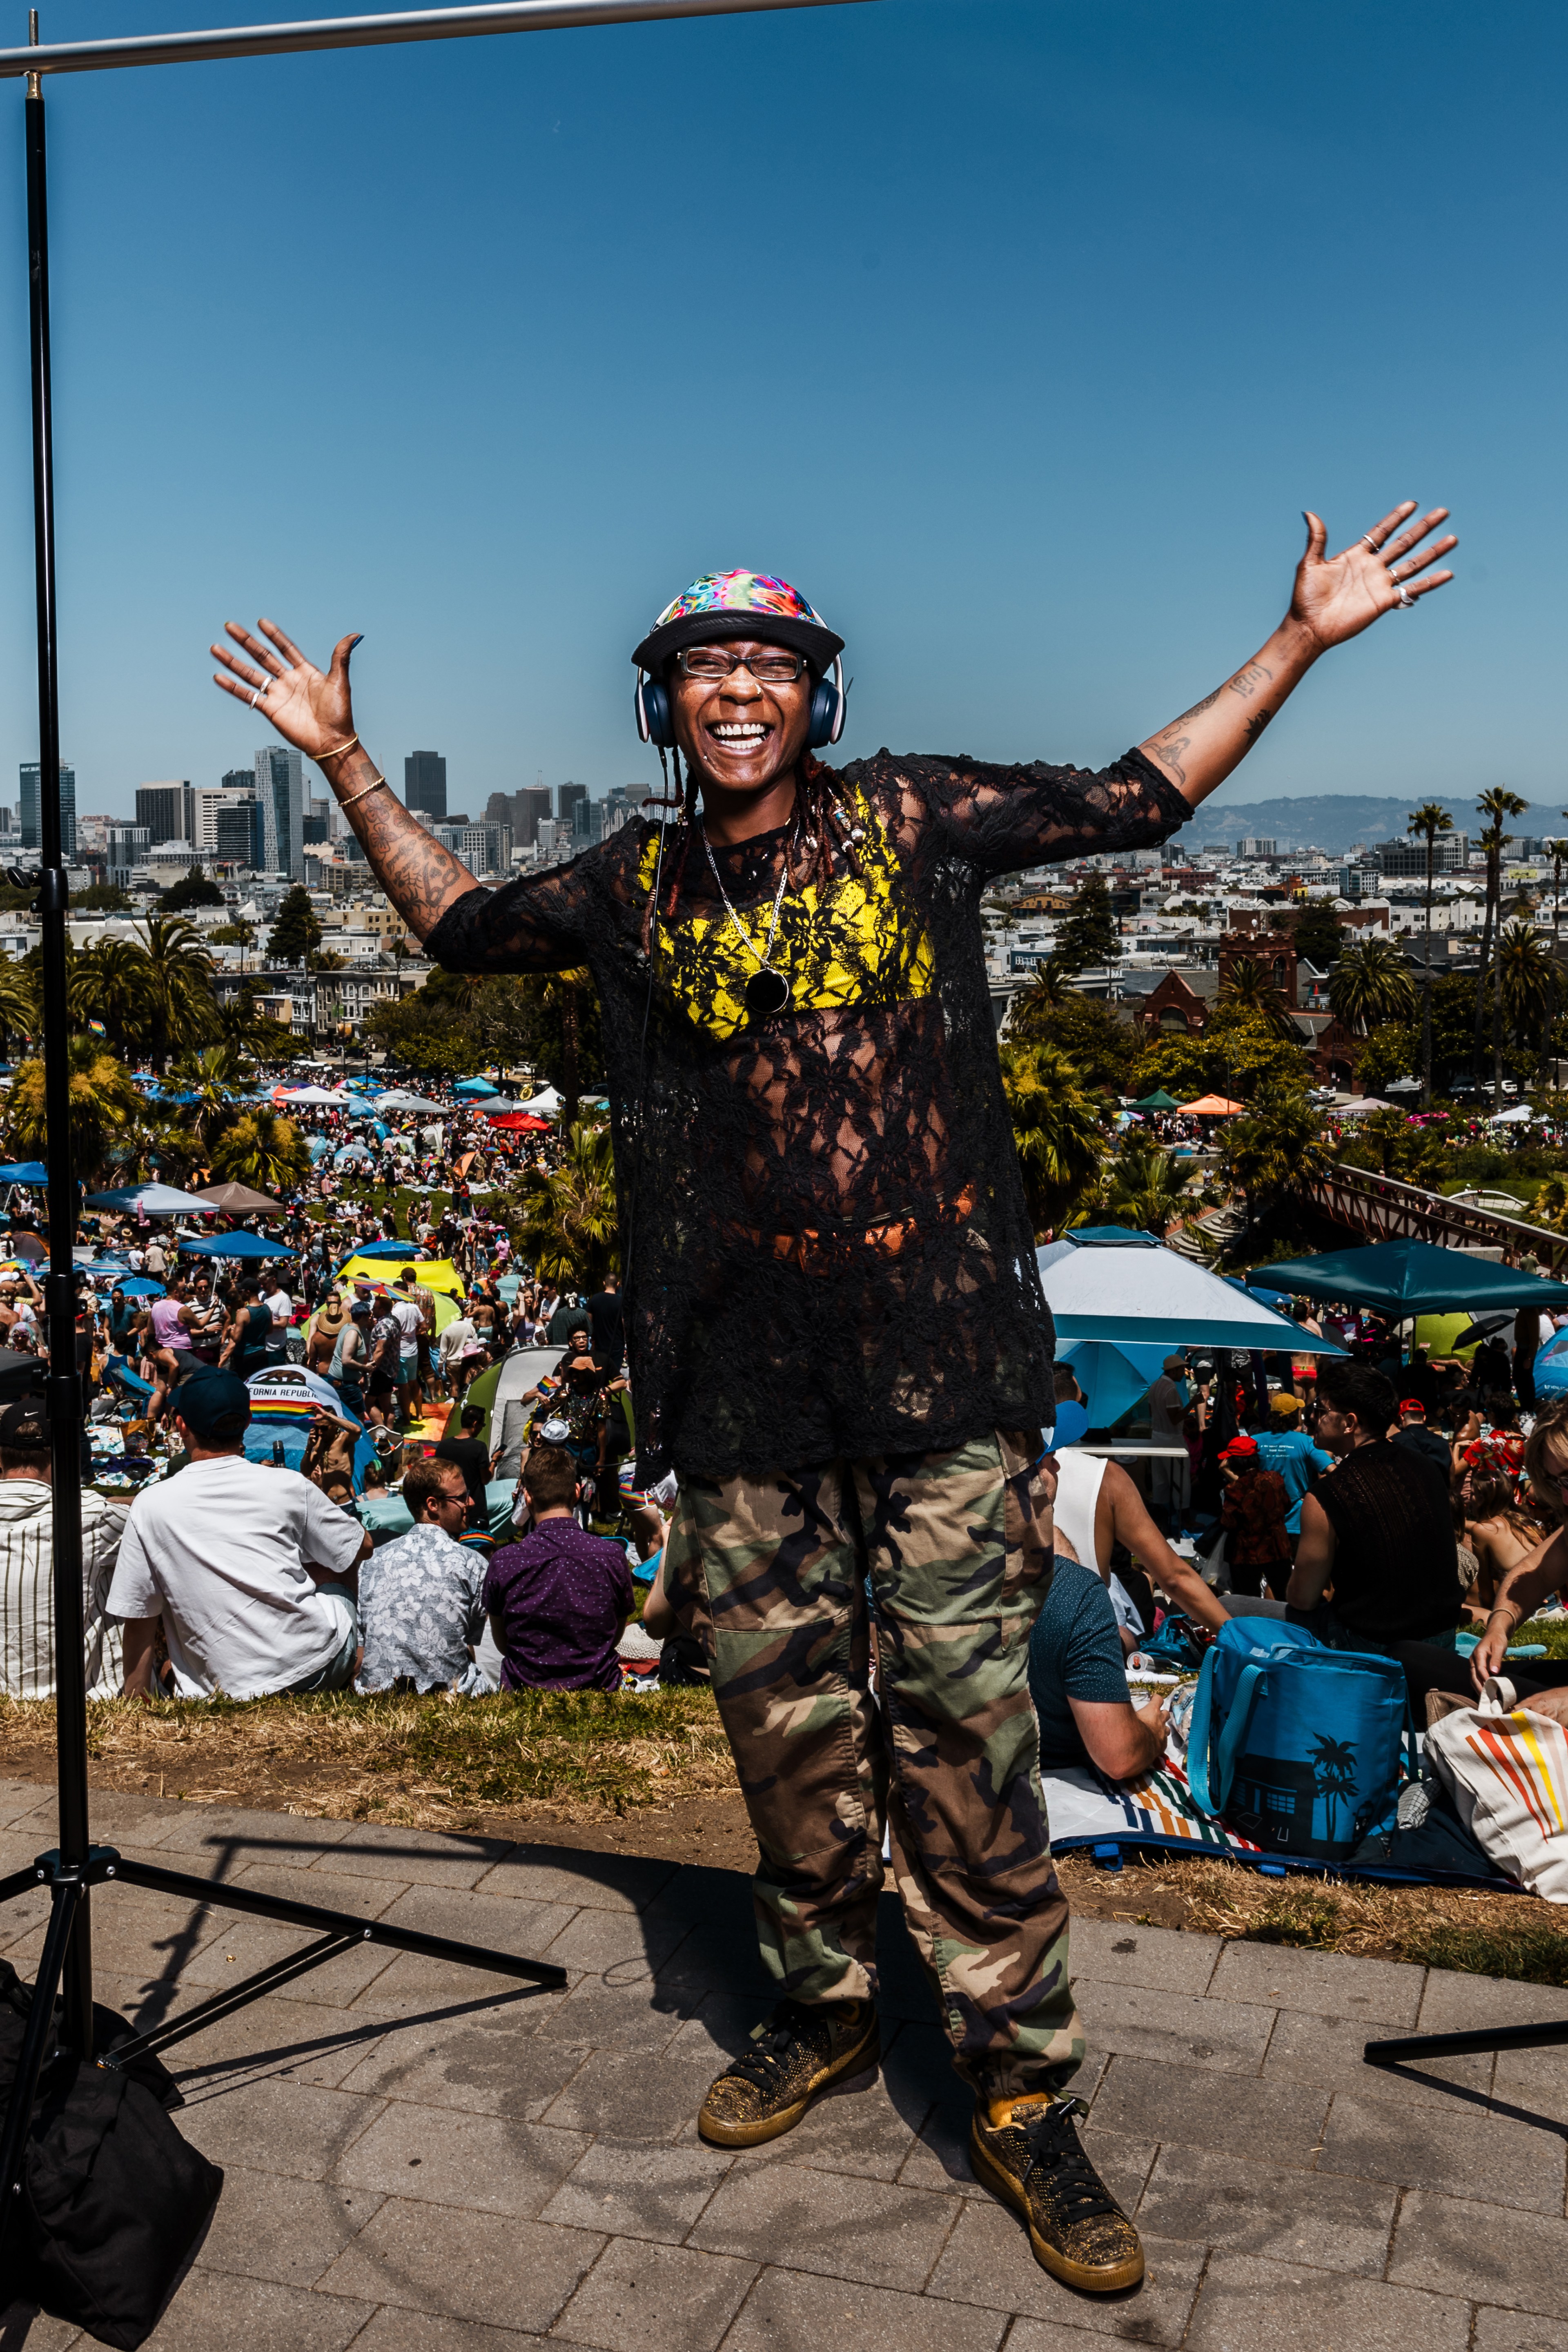 A person with a colorful cap and headphones, wearing a black netted top and camouflage pants, spreads their arms wide, smiling in front of a large festive crowd and cityscape.